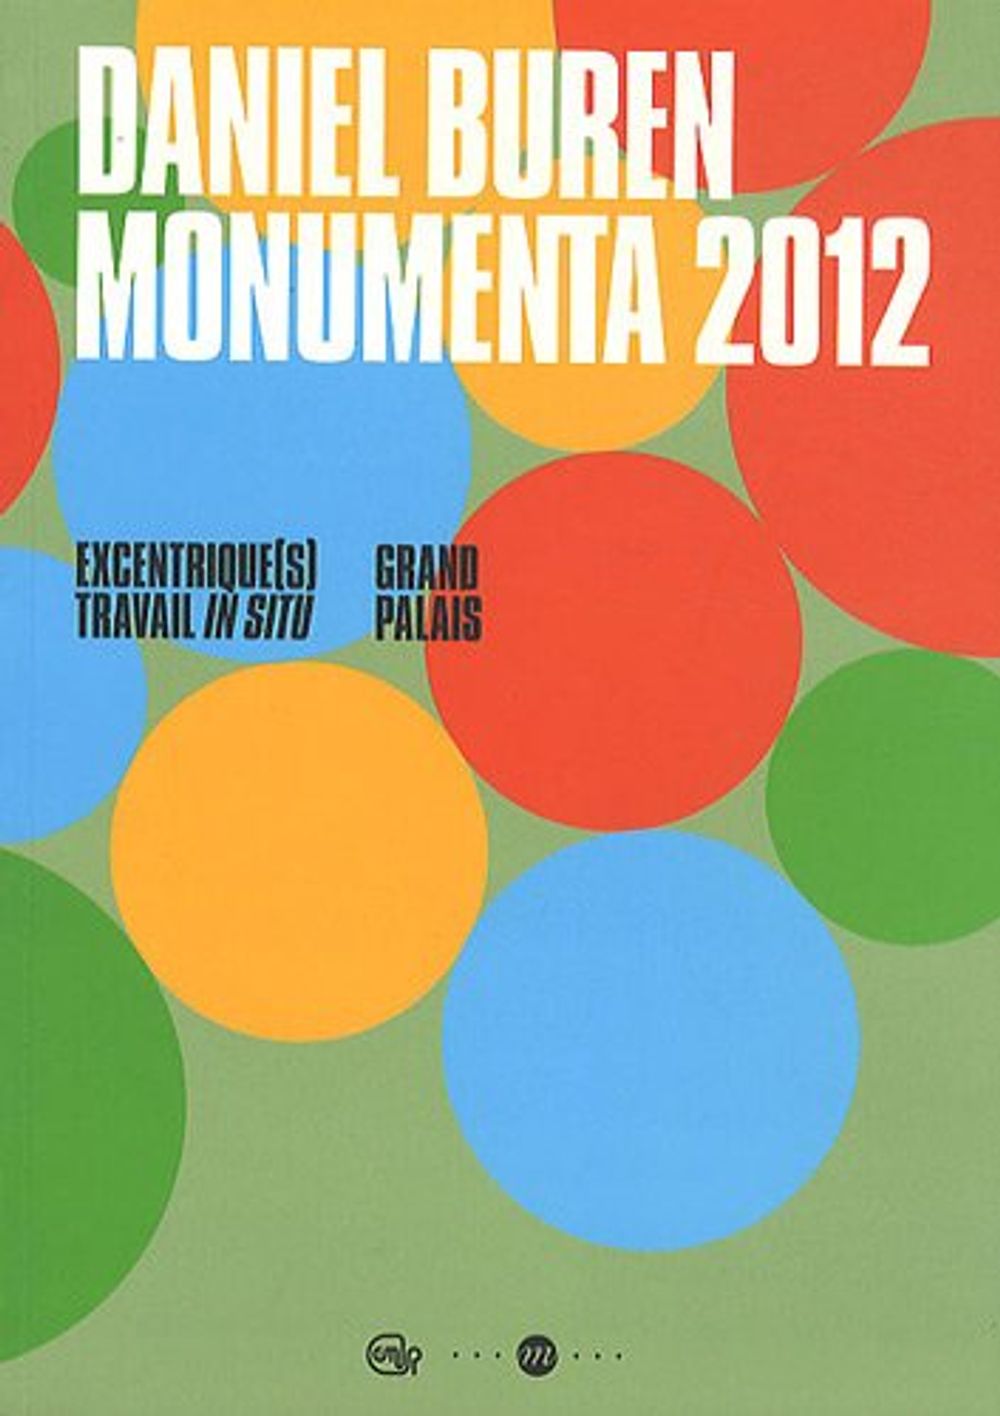 Book cover on plain gray background with title of Daniel Buren: Monumenta 2012